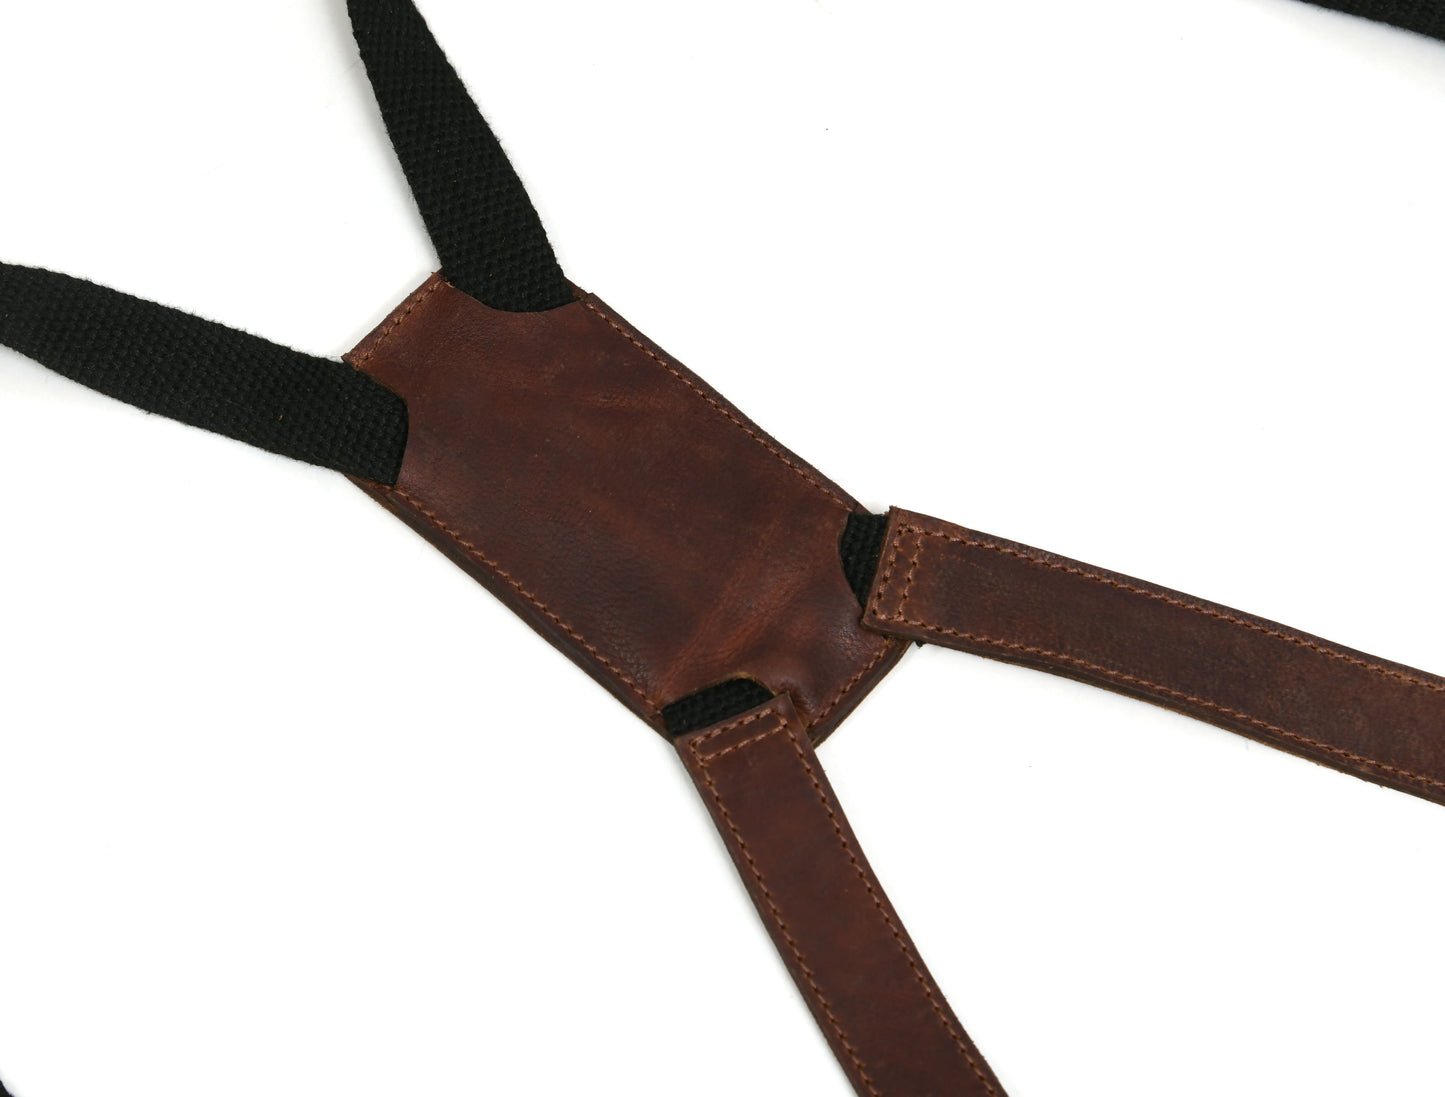 Grey apron with brown leather